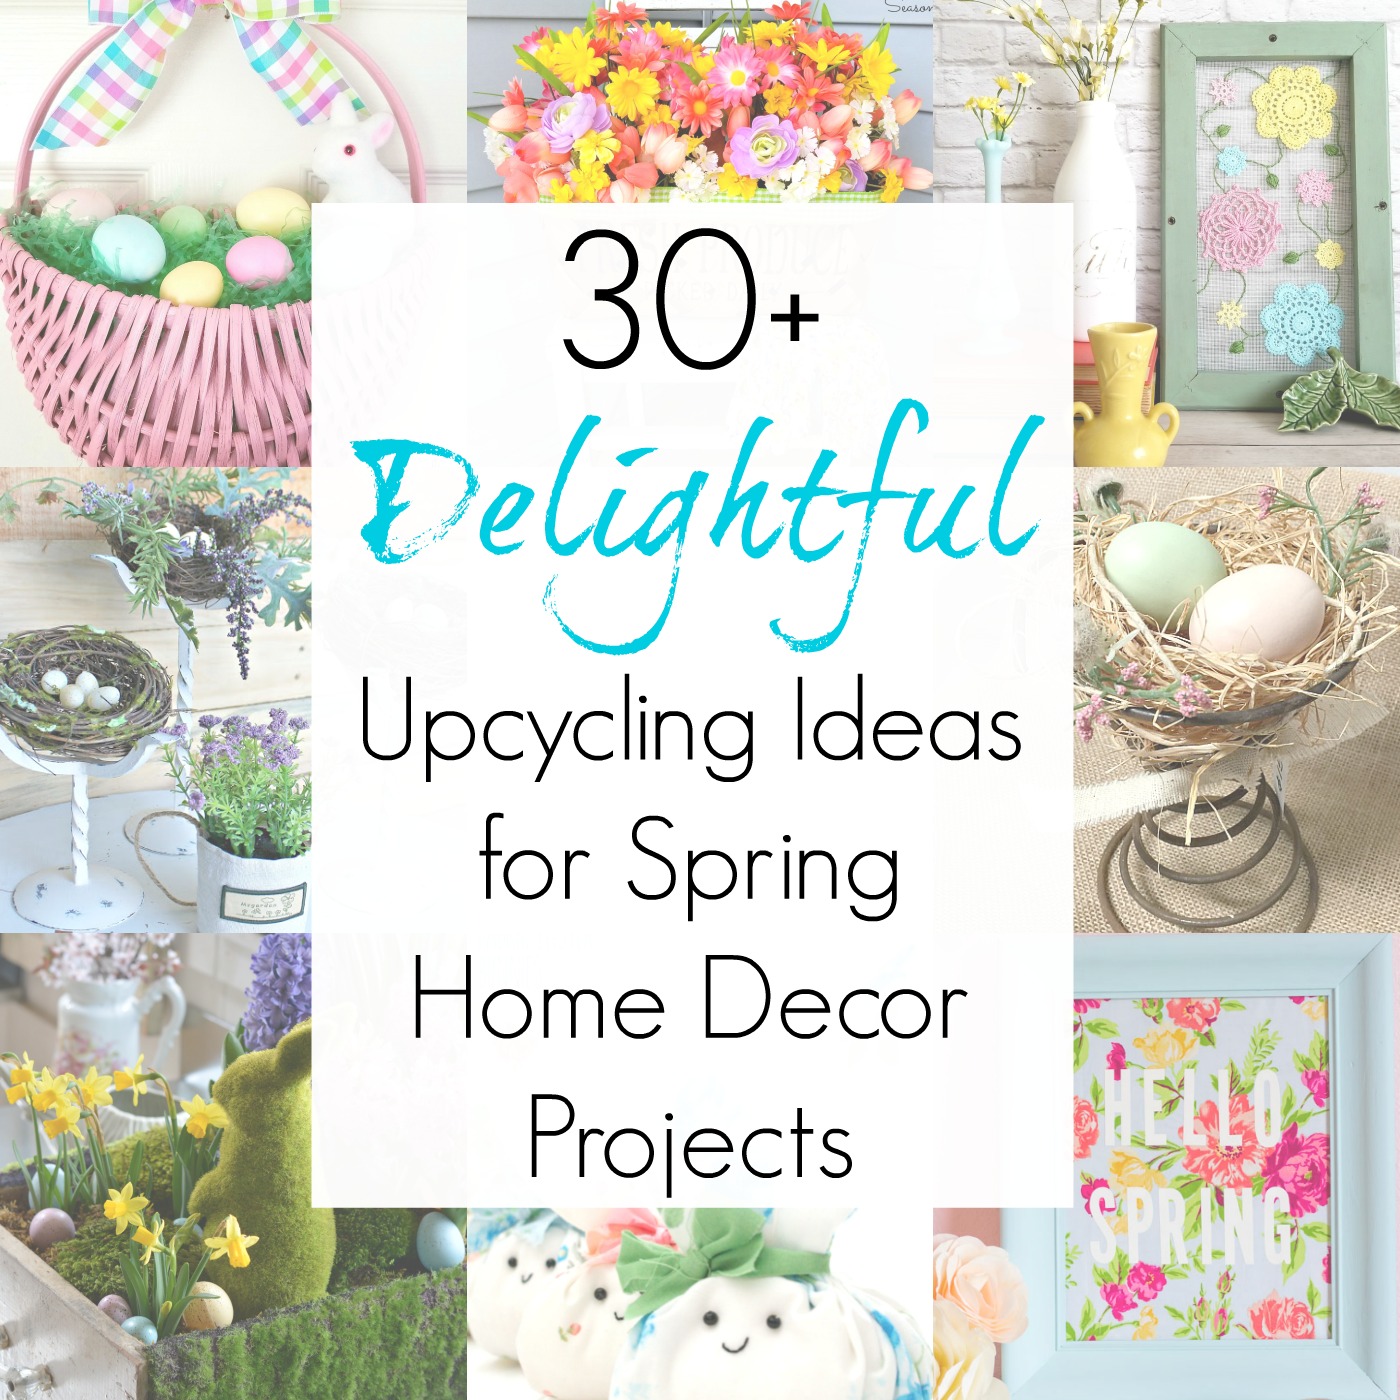 Creative DIY deco for the home: Inspiration and upcycling handicraft ideas